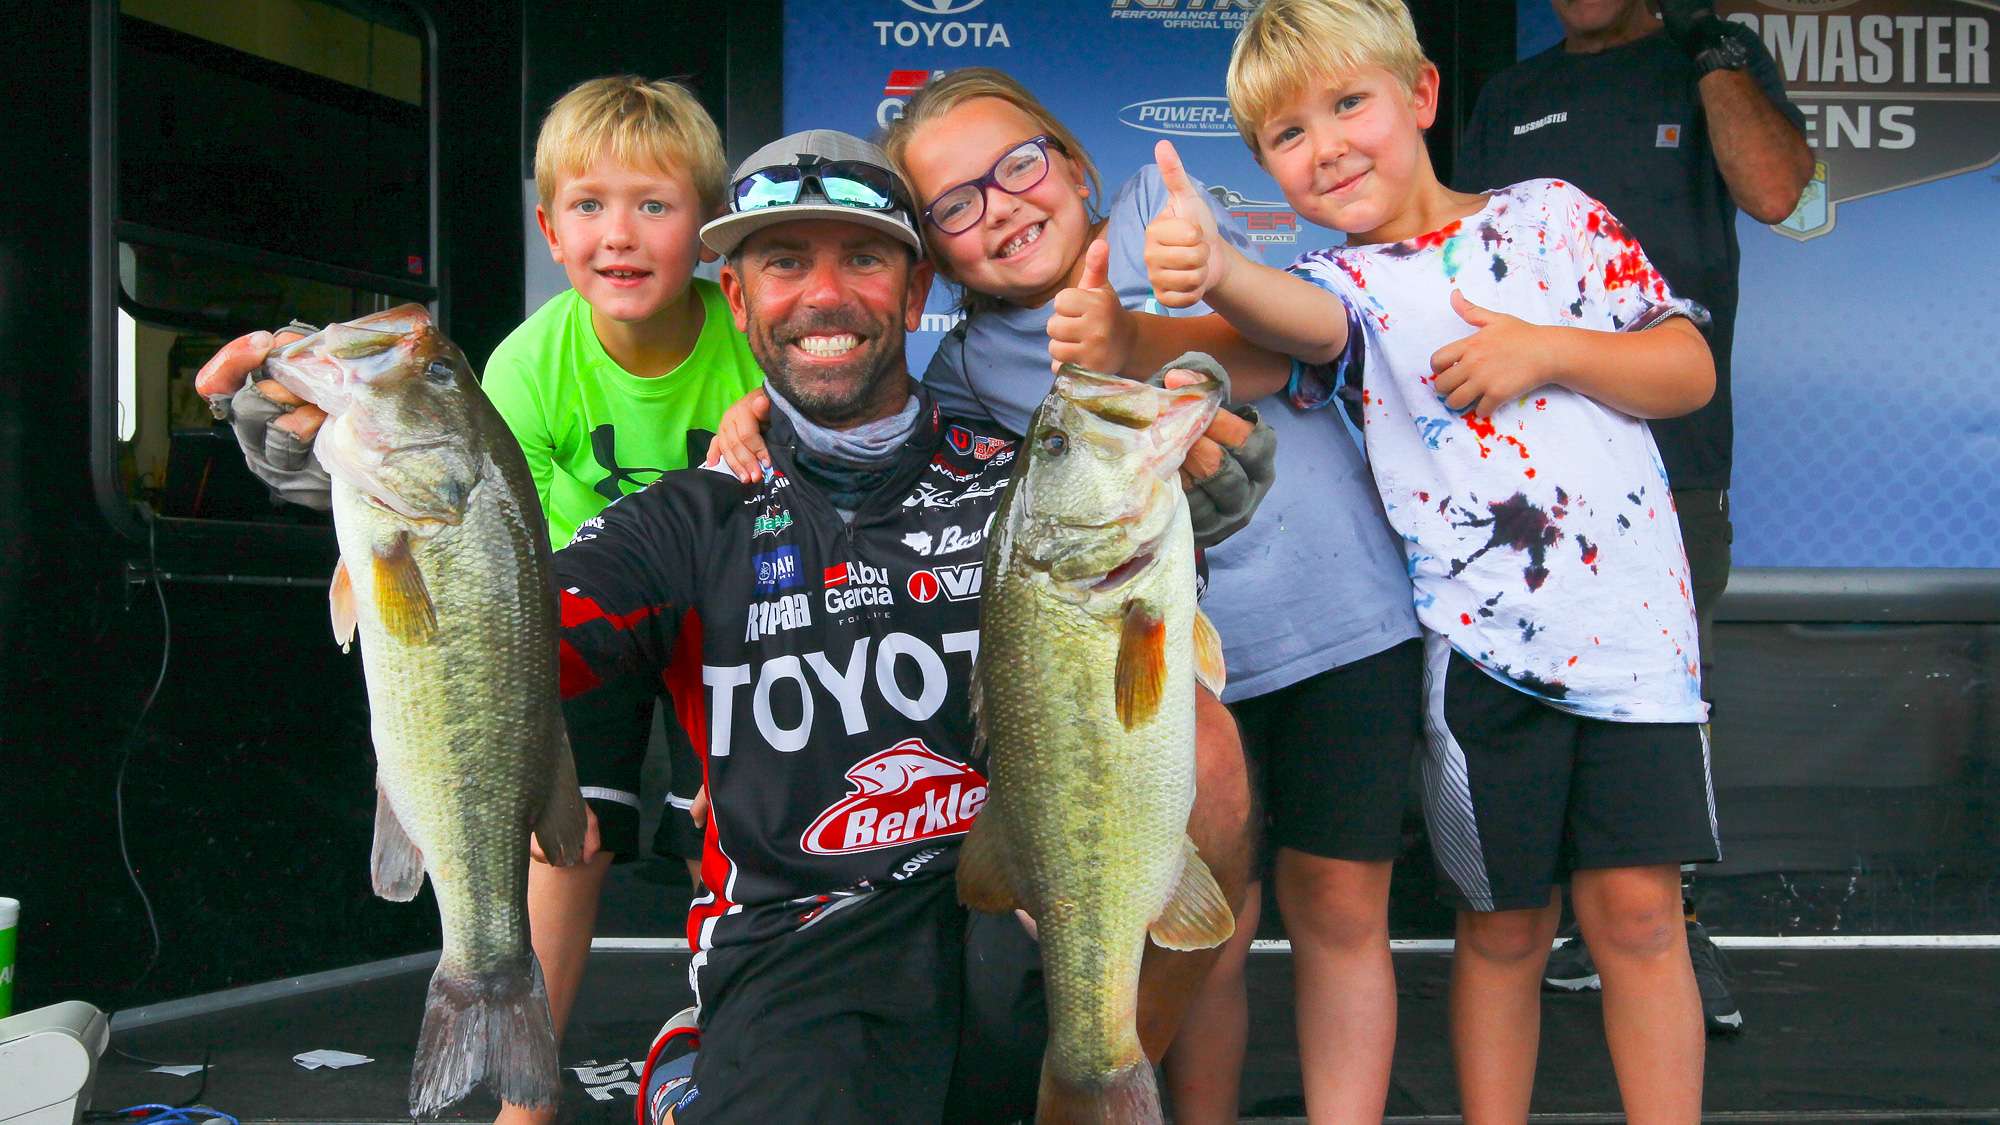 Mike Iaconelli, 1st, 30-4